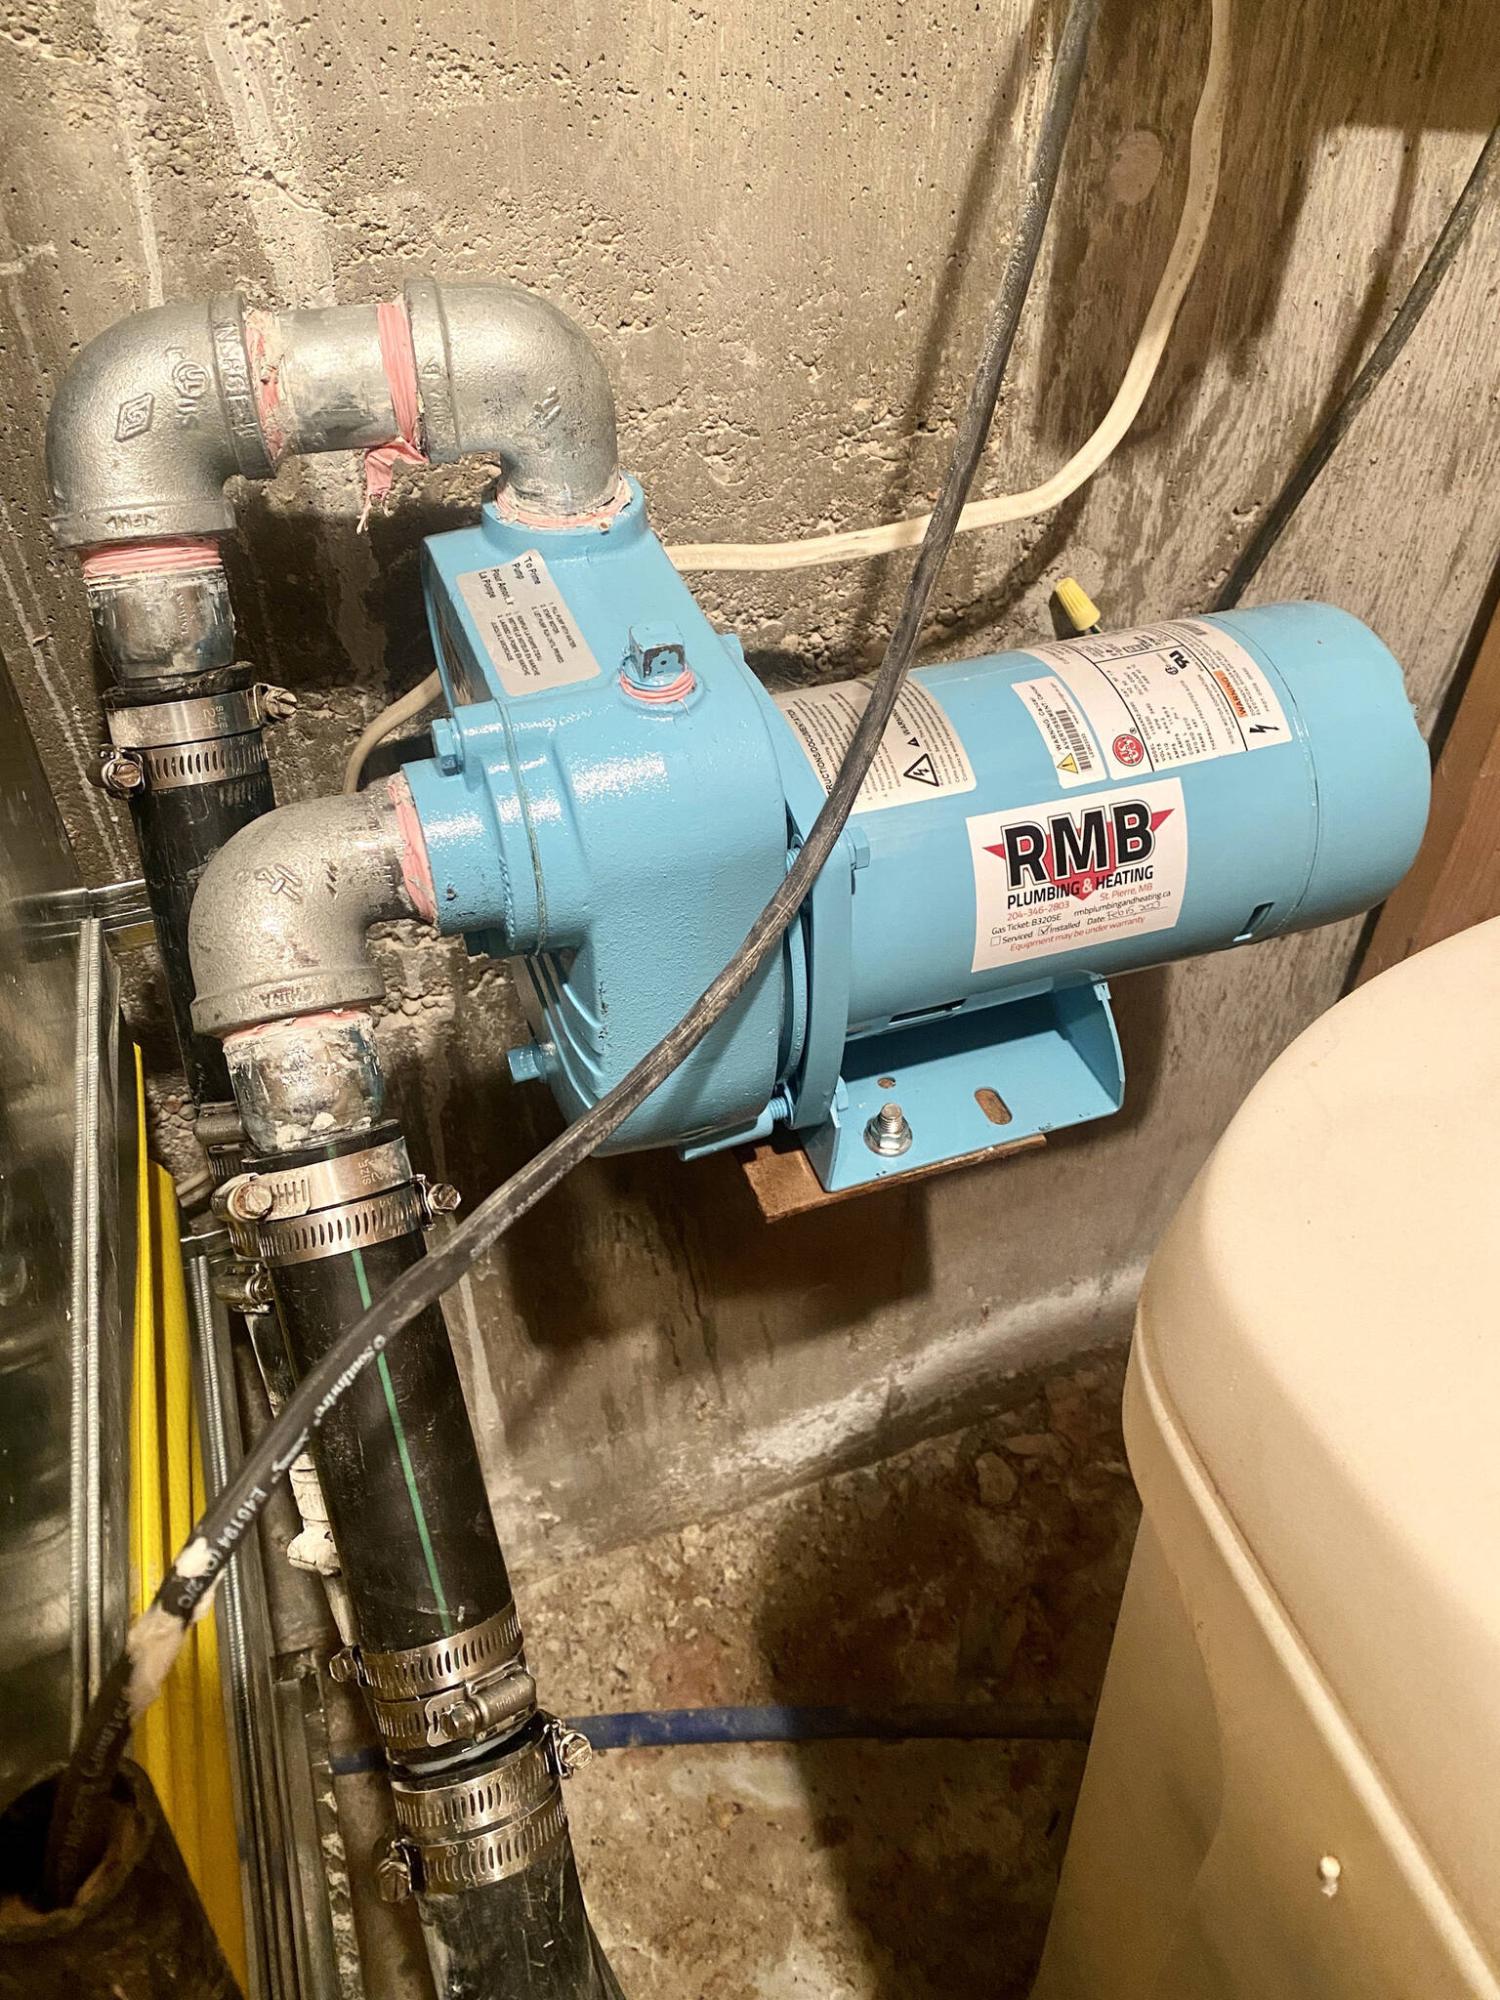  <p>Photos by Marc LaBossiere / Winnipeg Free Press</p>
                                <p>The new half&mdash;horsepower septic pump was mounted on the old bracket, attached to new fittings for the in and out-flow of the septic system.</p> 